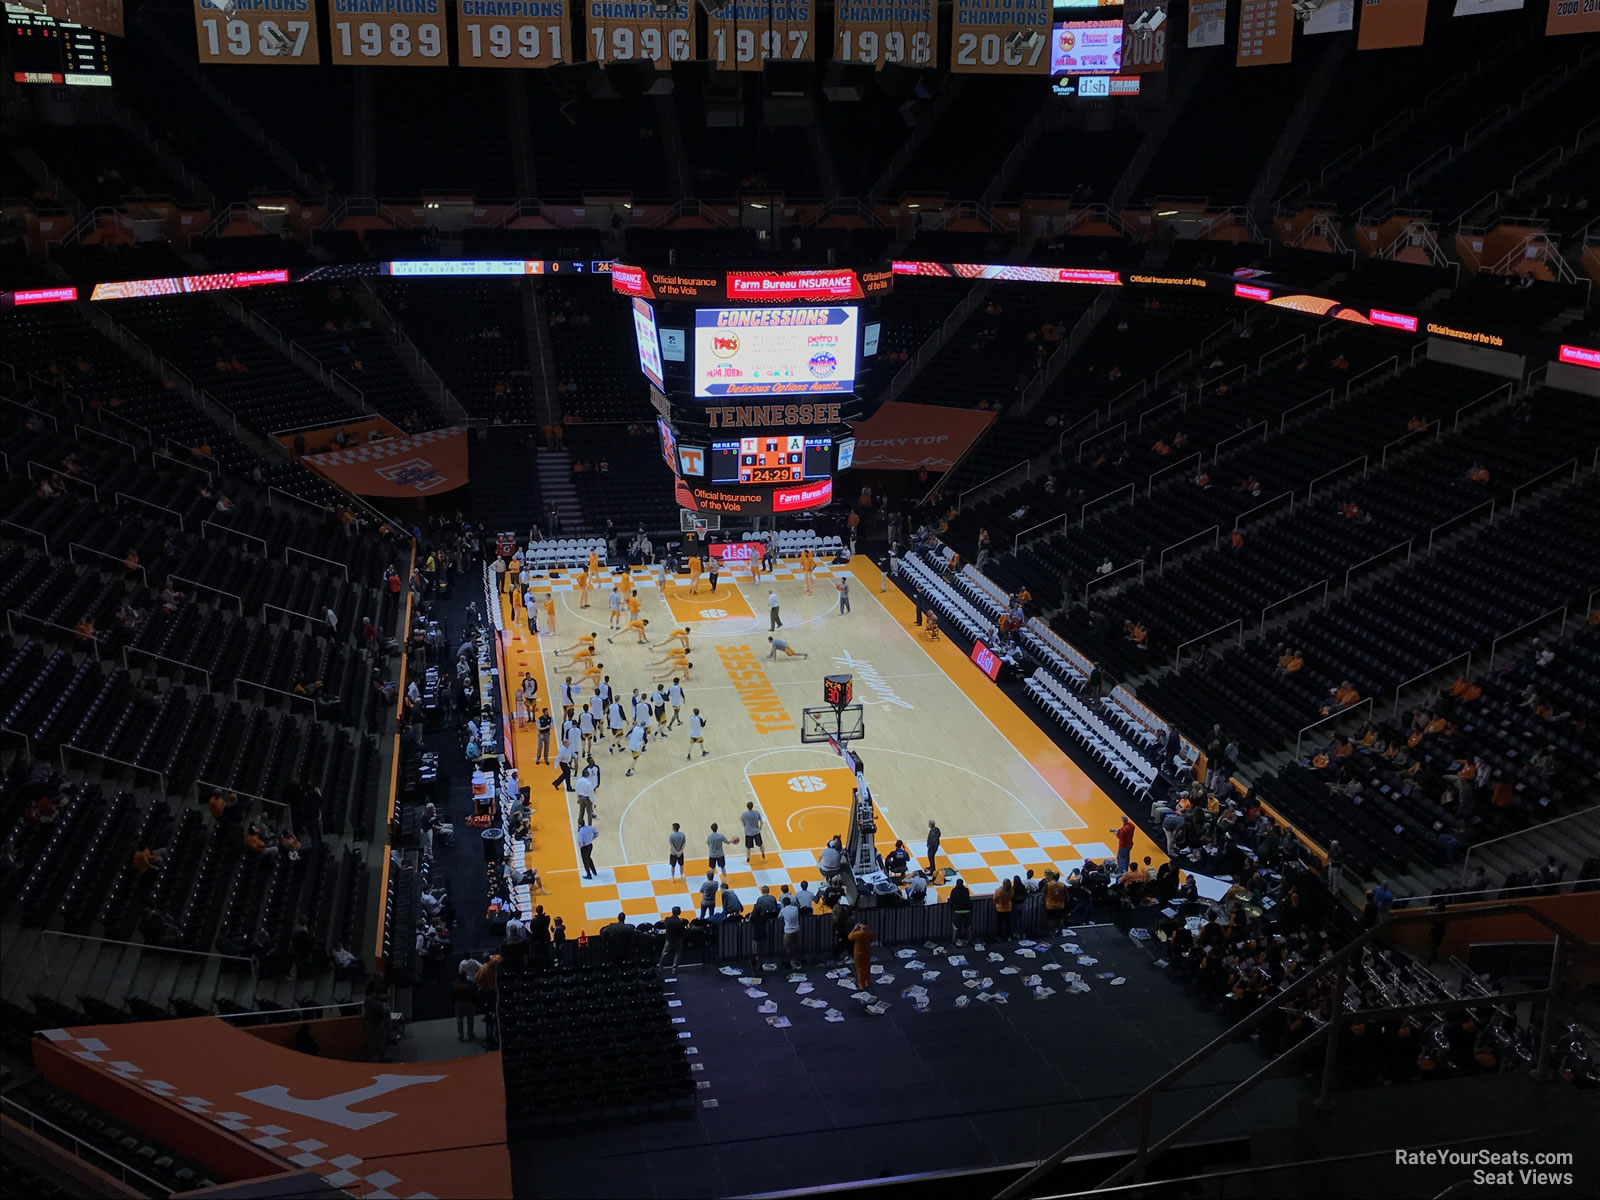 section 330, row 7 seat view  - thompson-boling arena